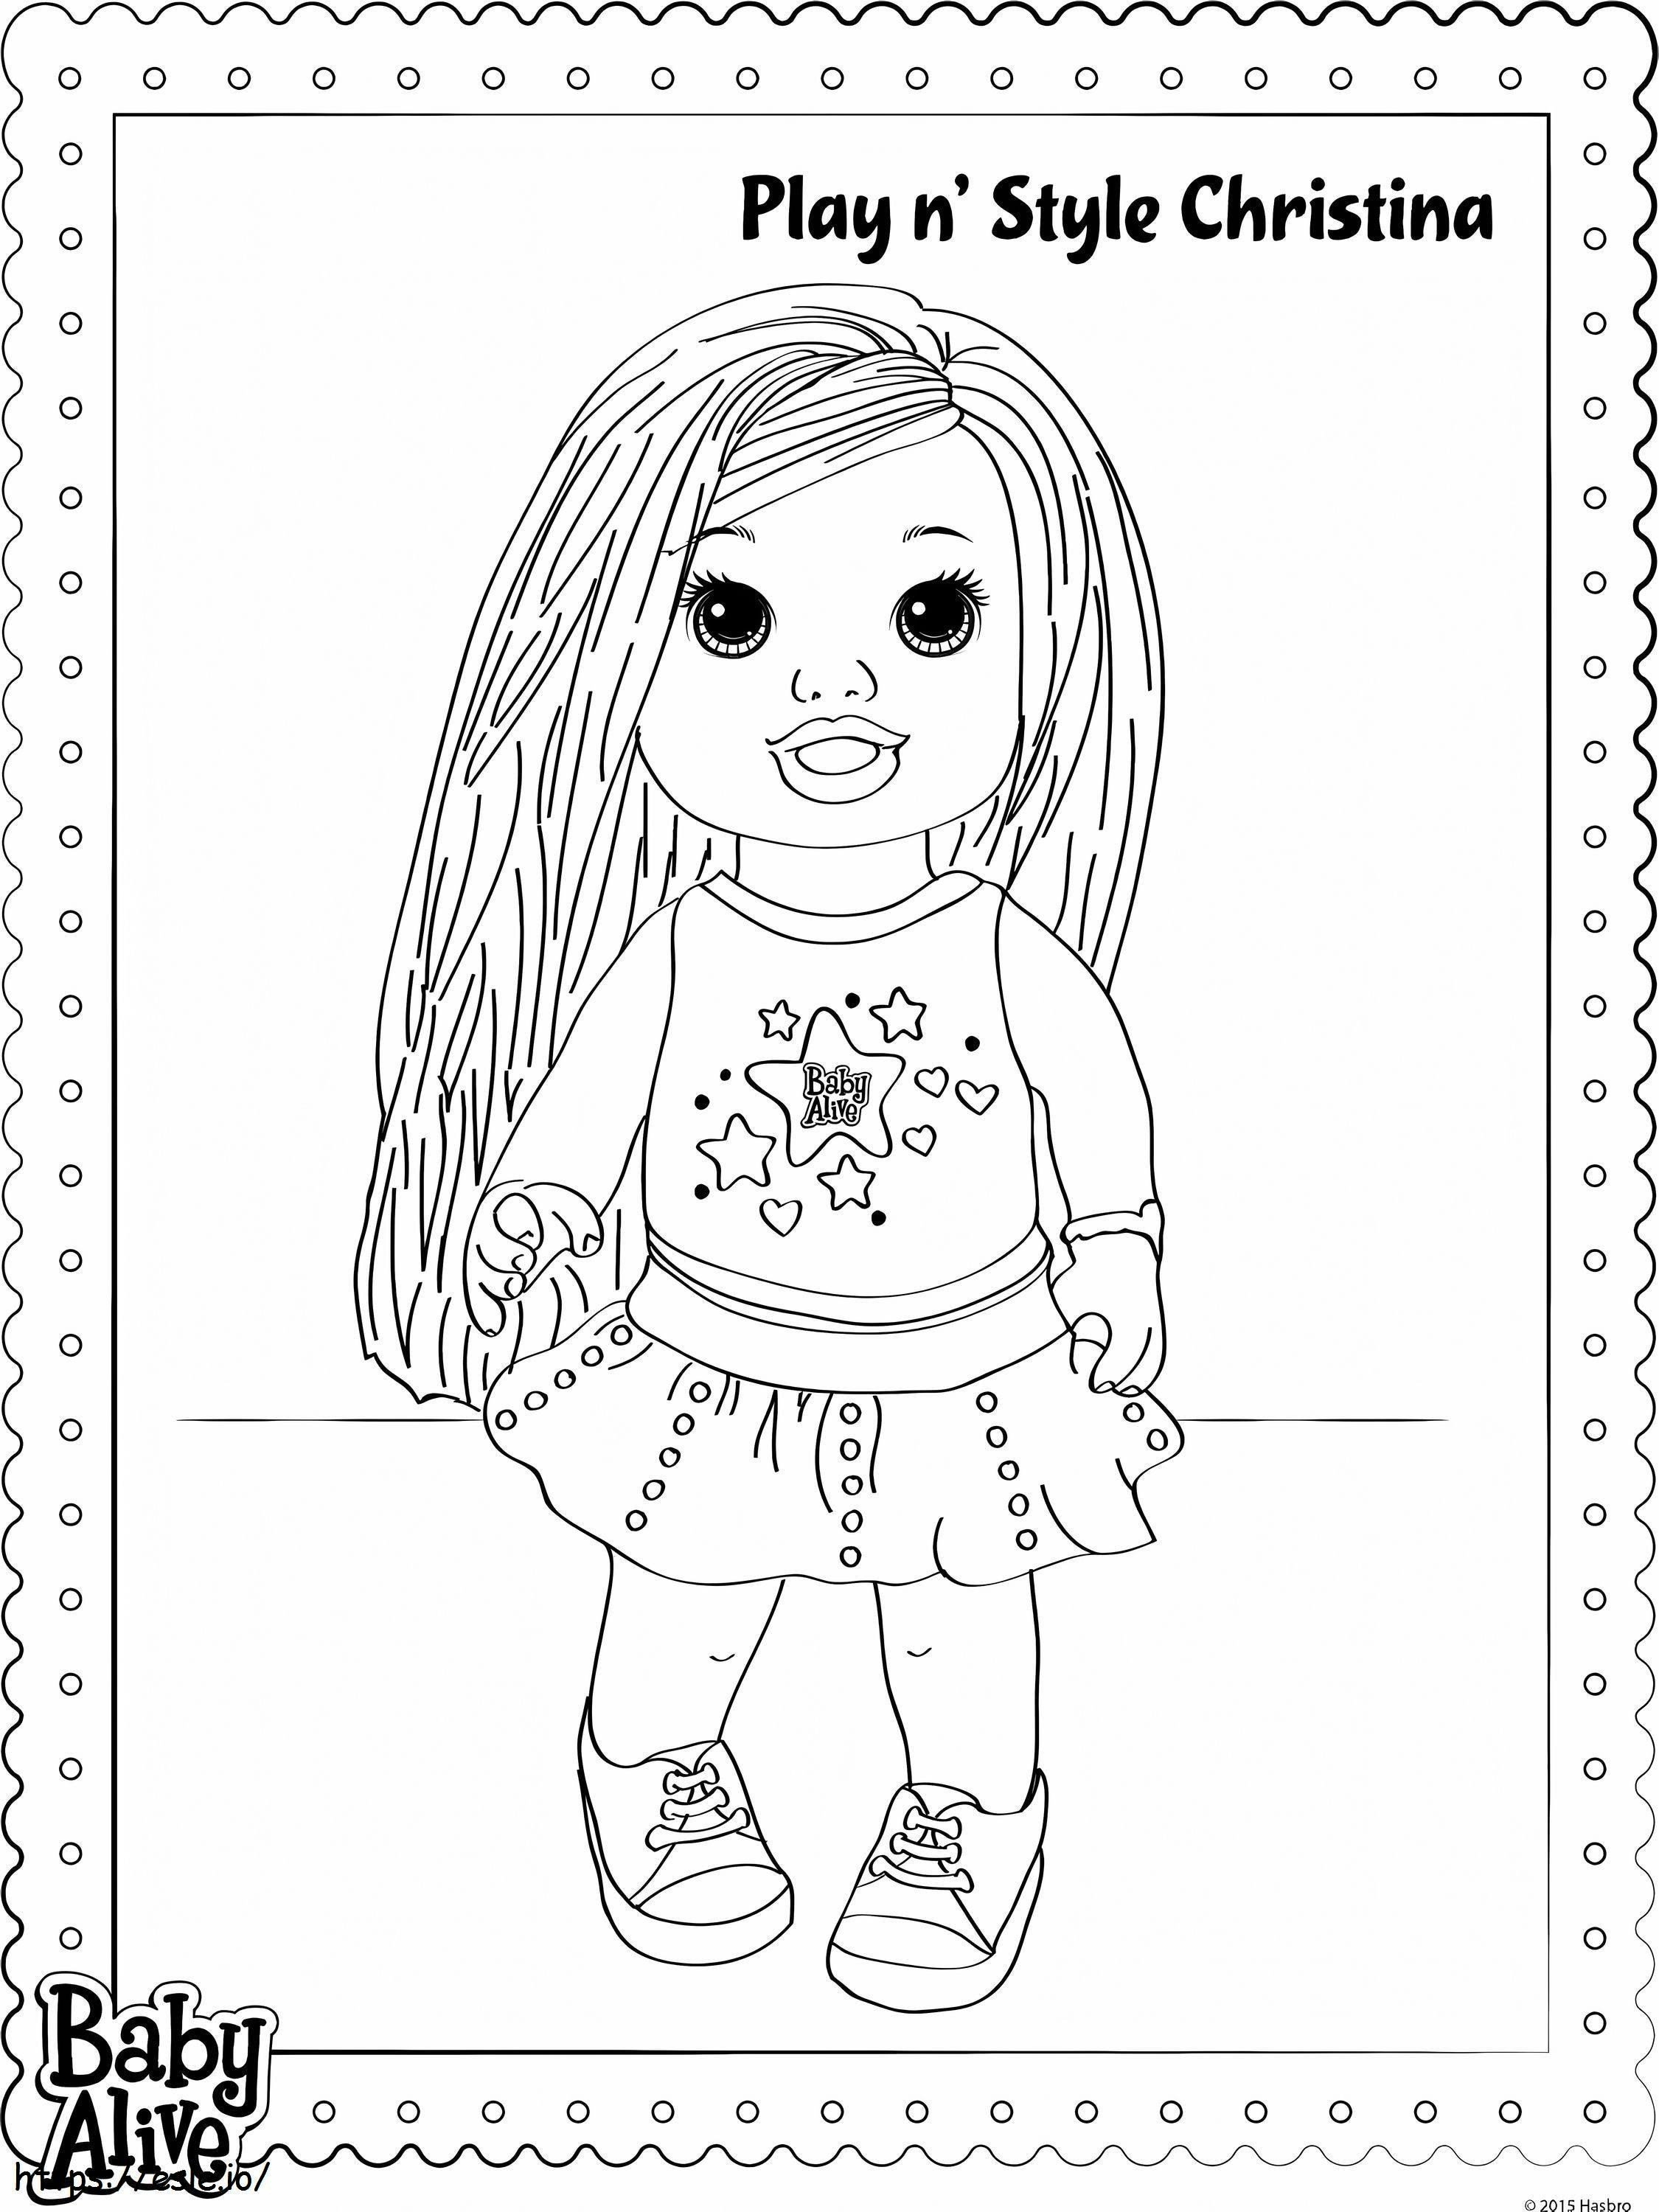 Play N Style Christina Baby Alive coloring page